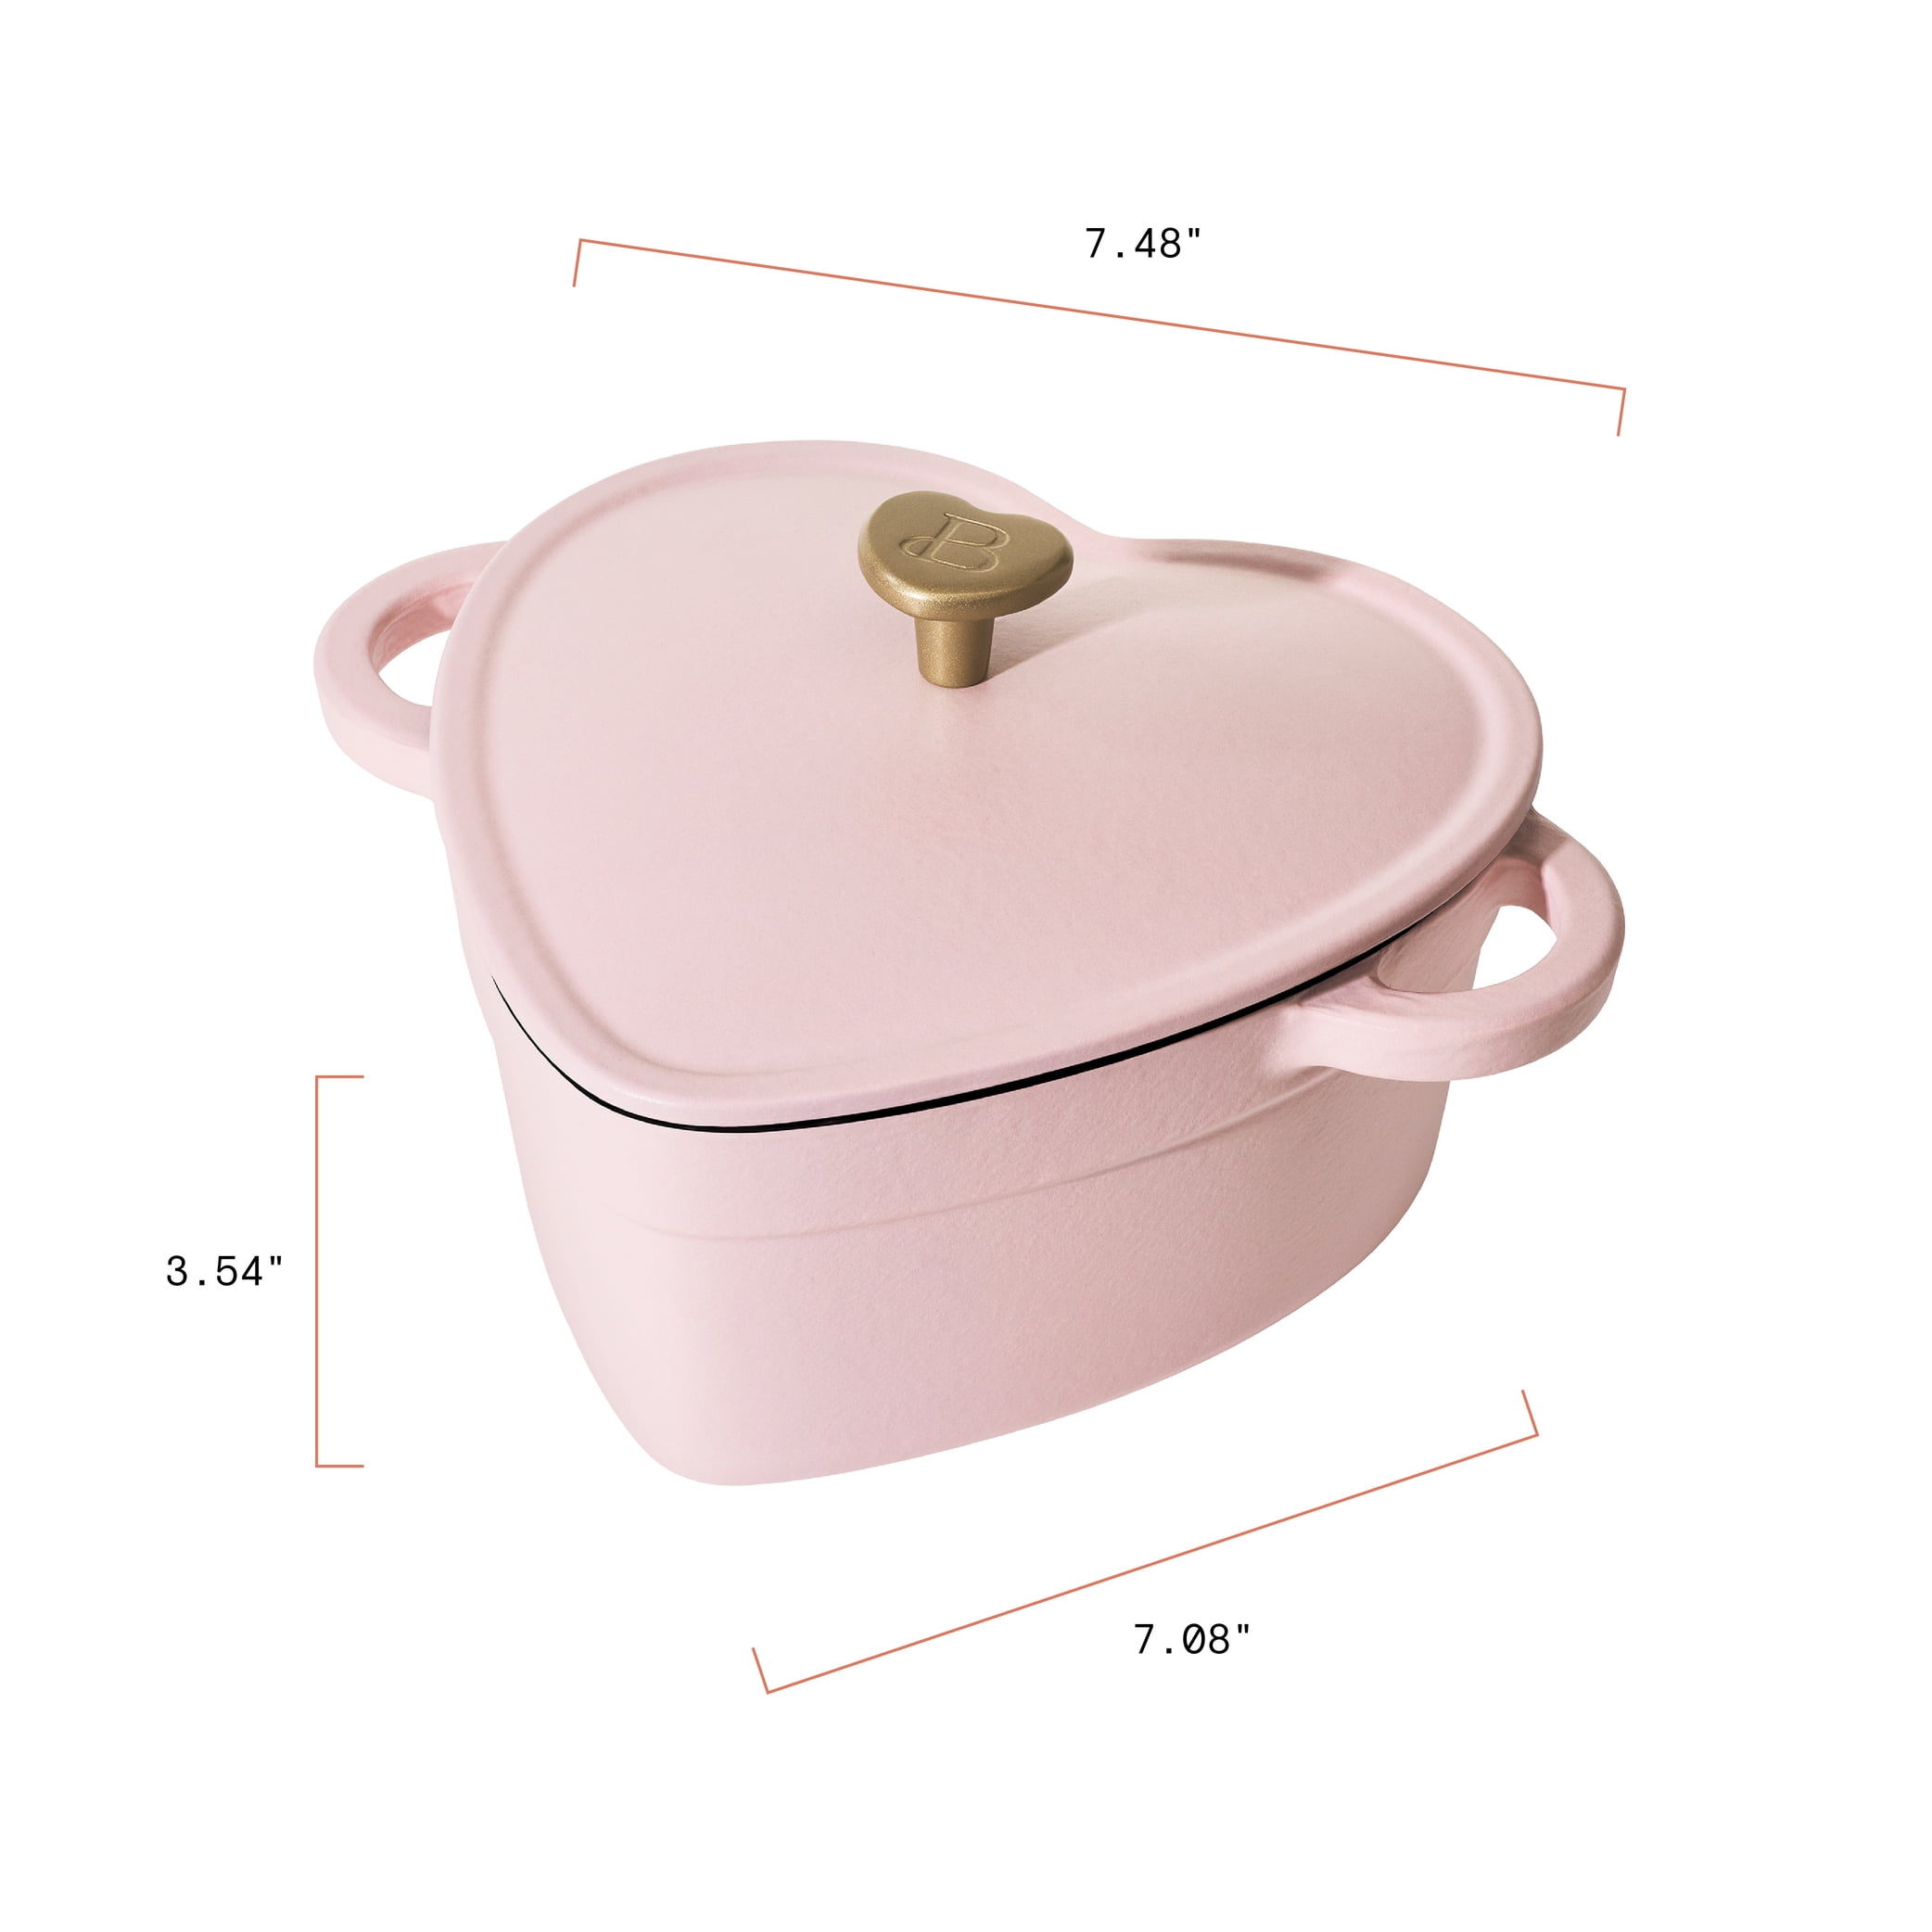 Le Creuset Shell pink heart Dutch Oven for Sale in Glendale, CA